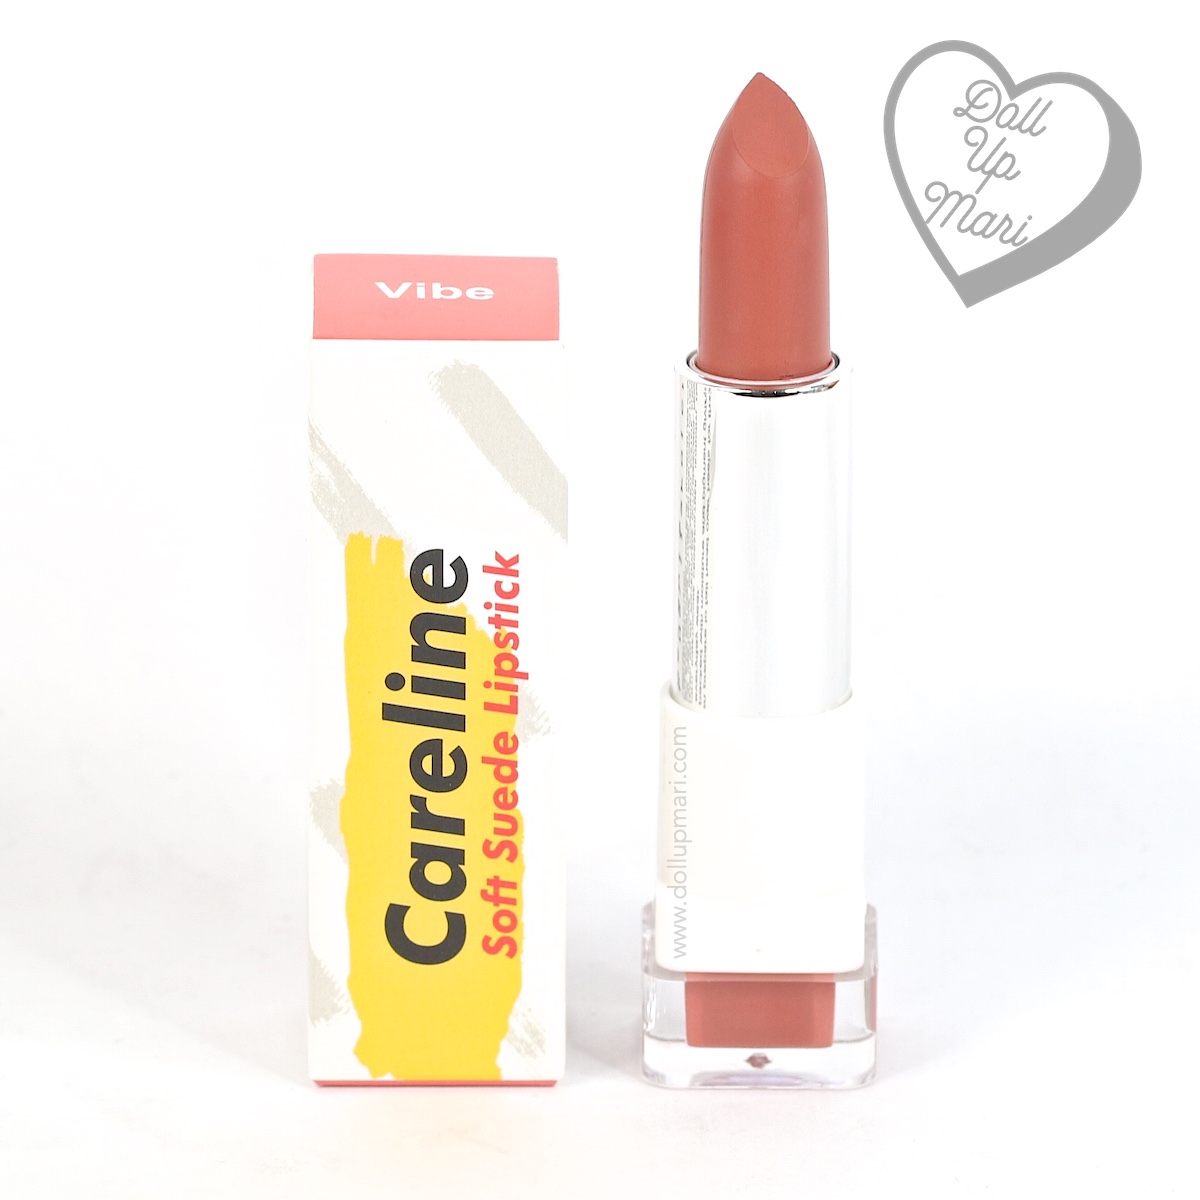 Careline Soft Suede Lipstick (Vibe) Review, Swatch, Price 